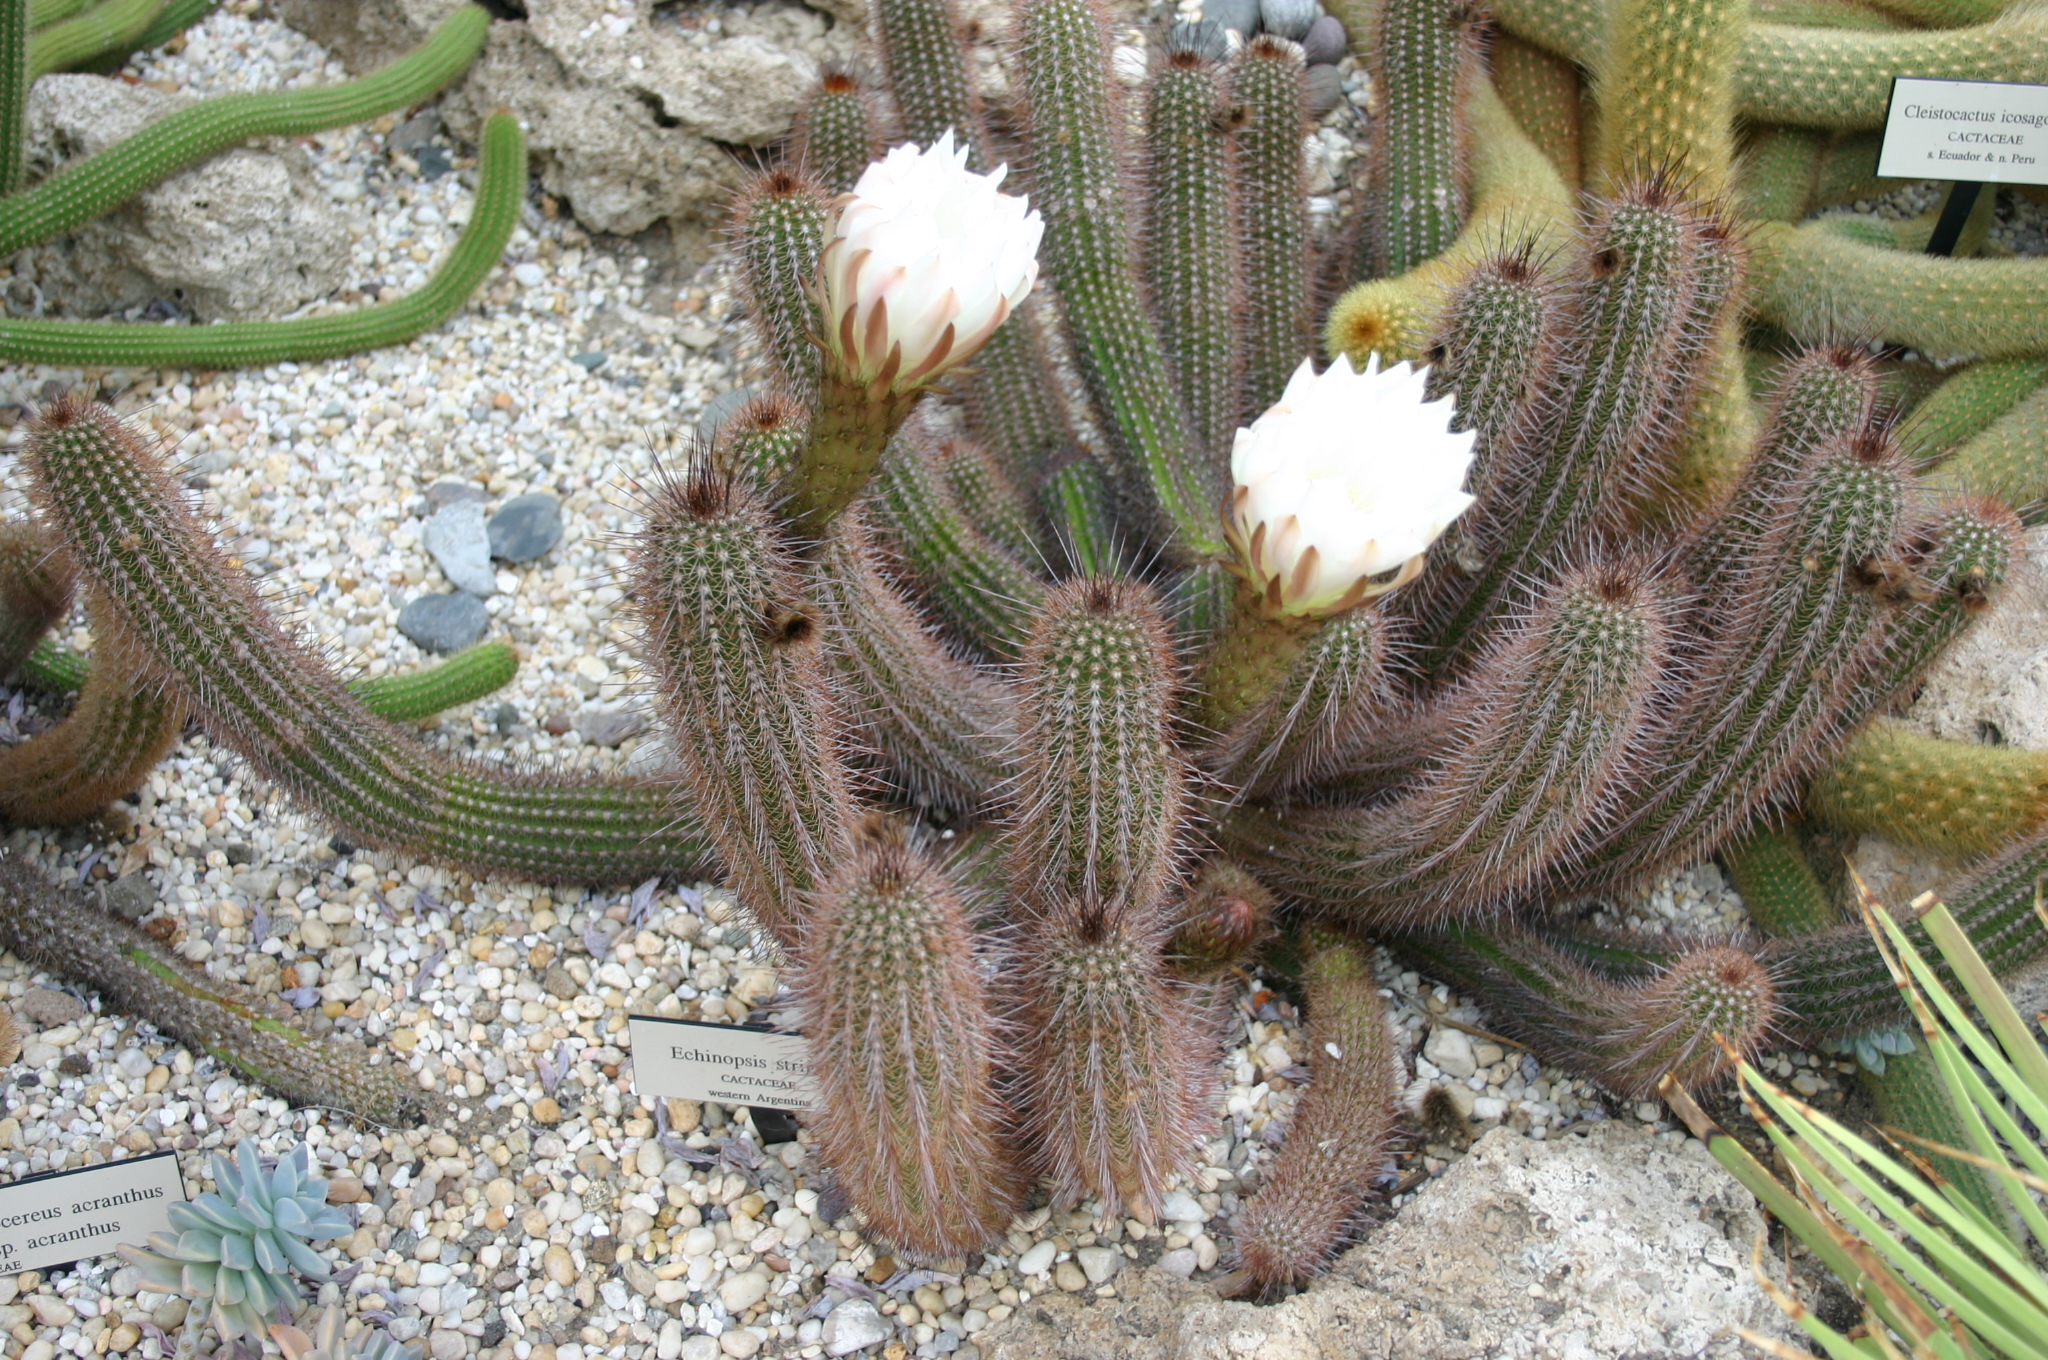 several white flowers and leaves next to large rocks